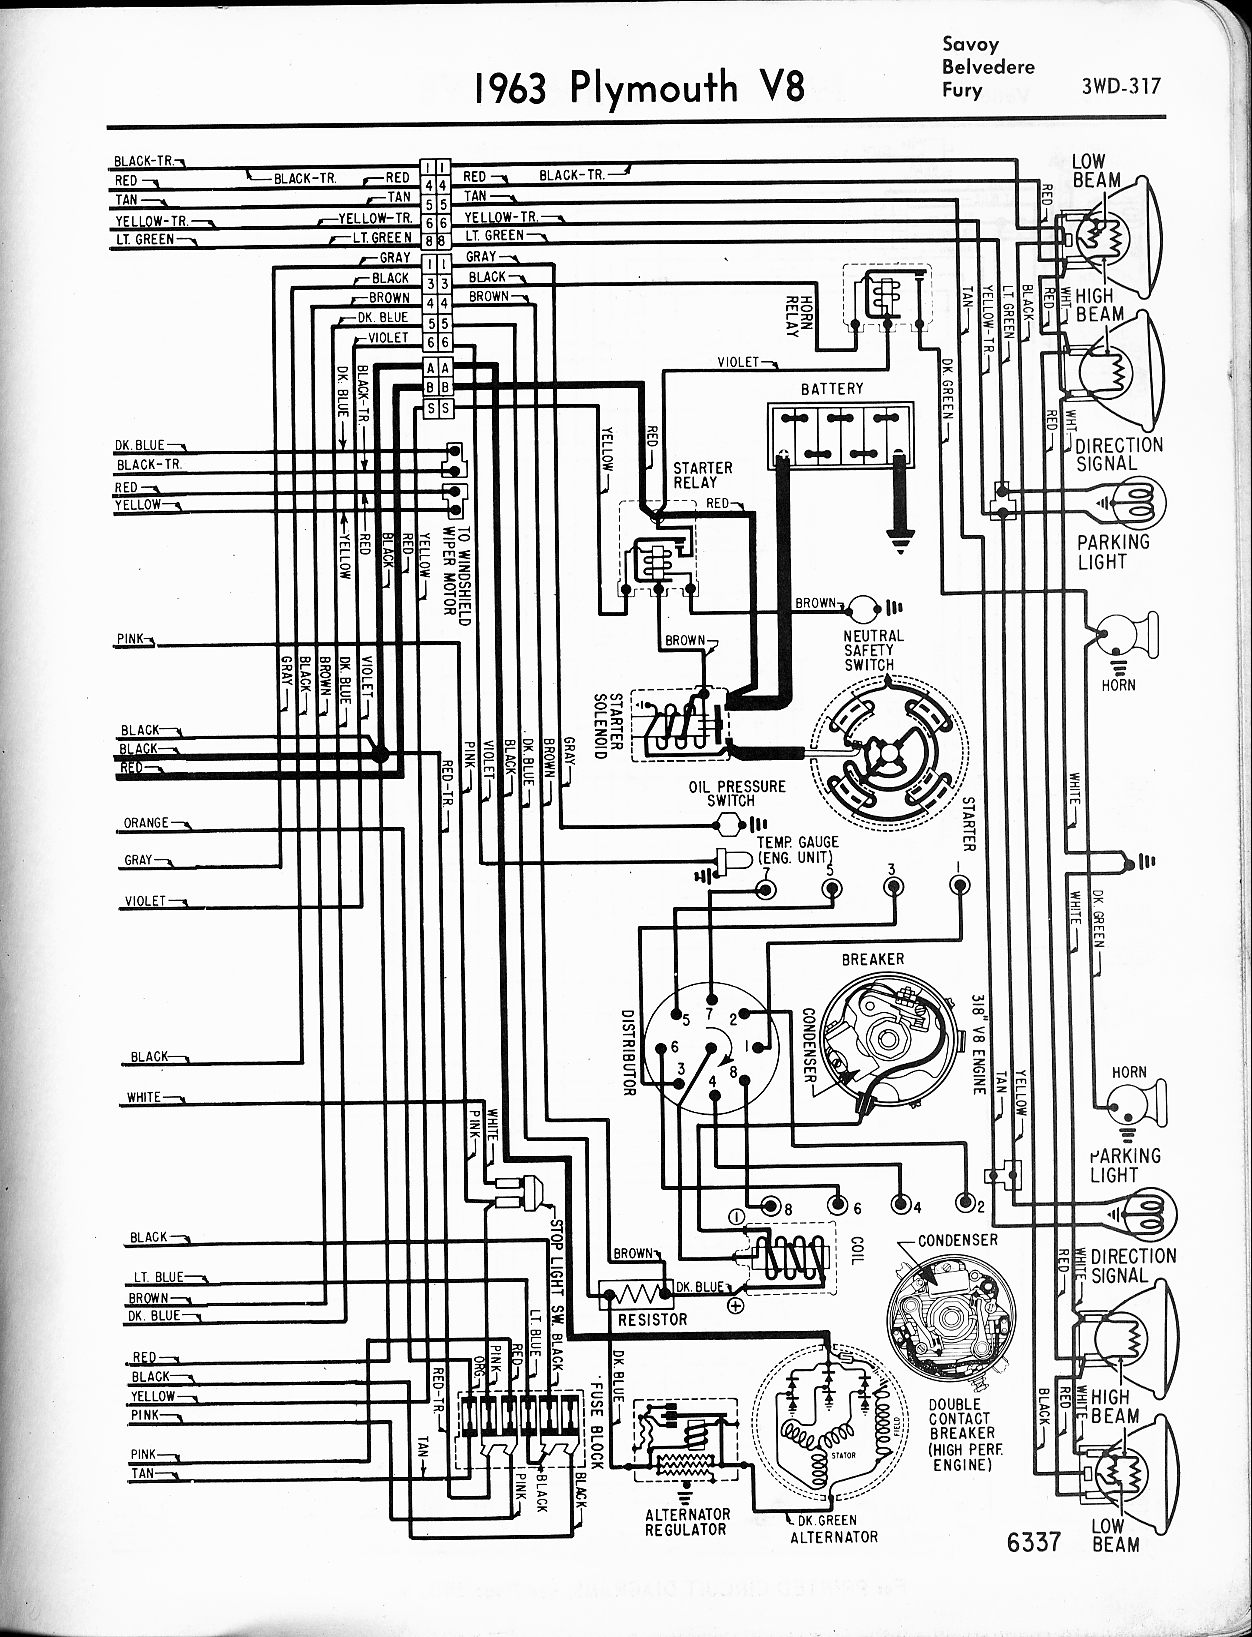 1956 - 1965 Plymouth Wiring - The Old Car Manual Project